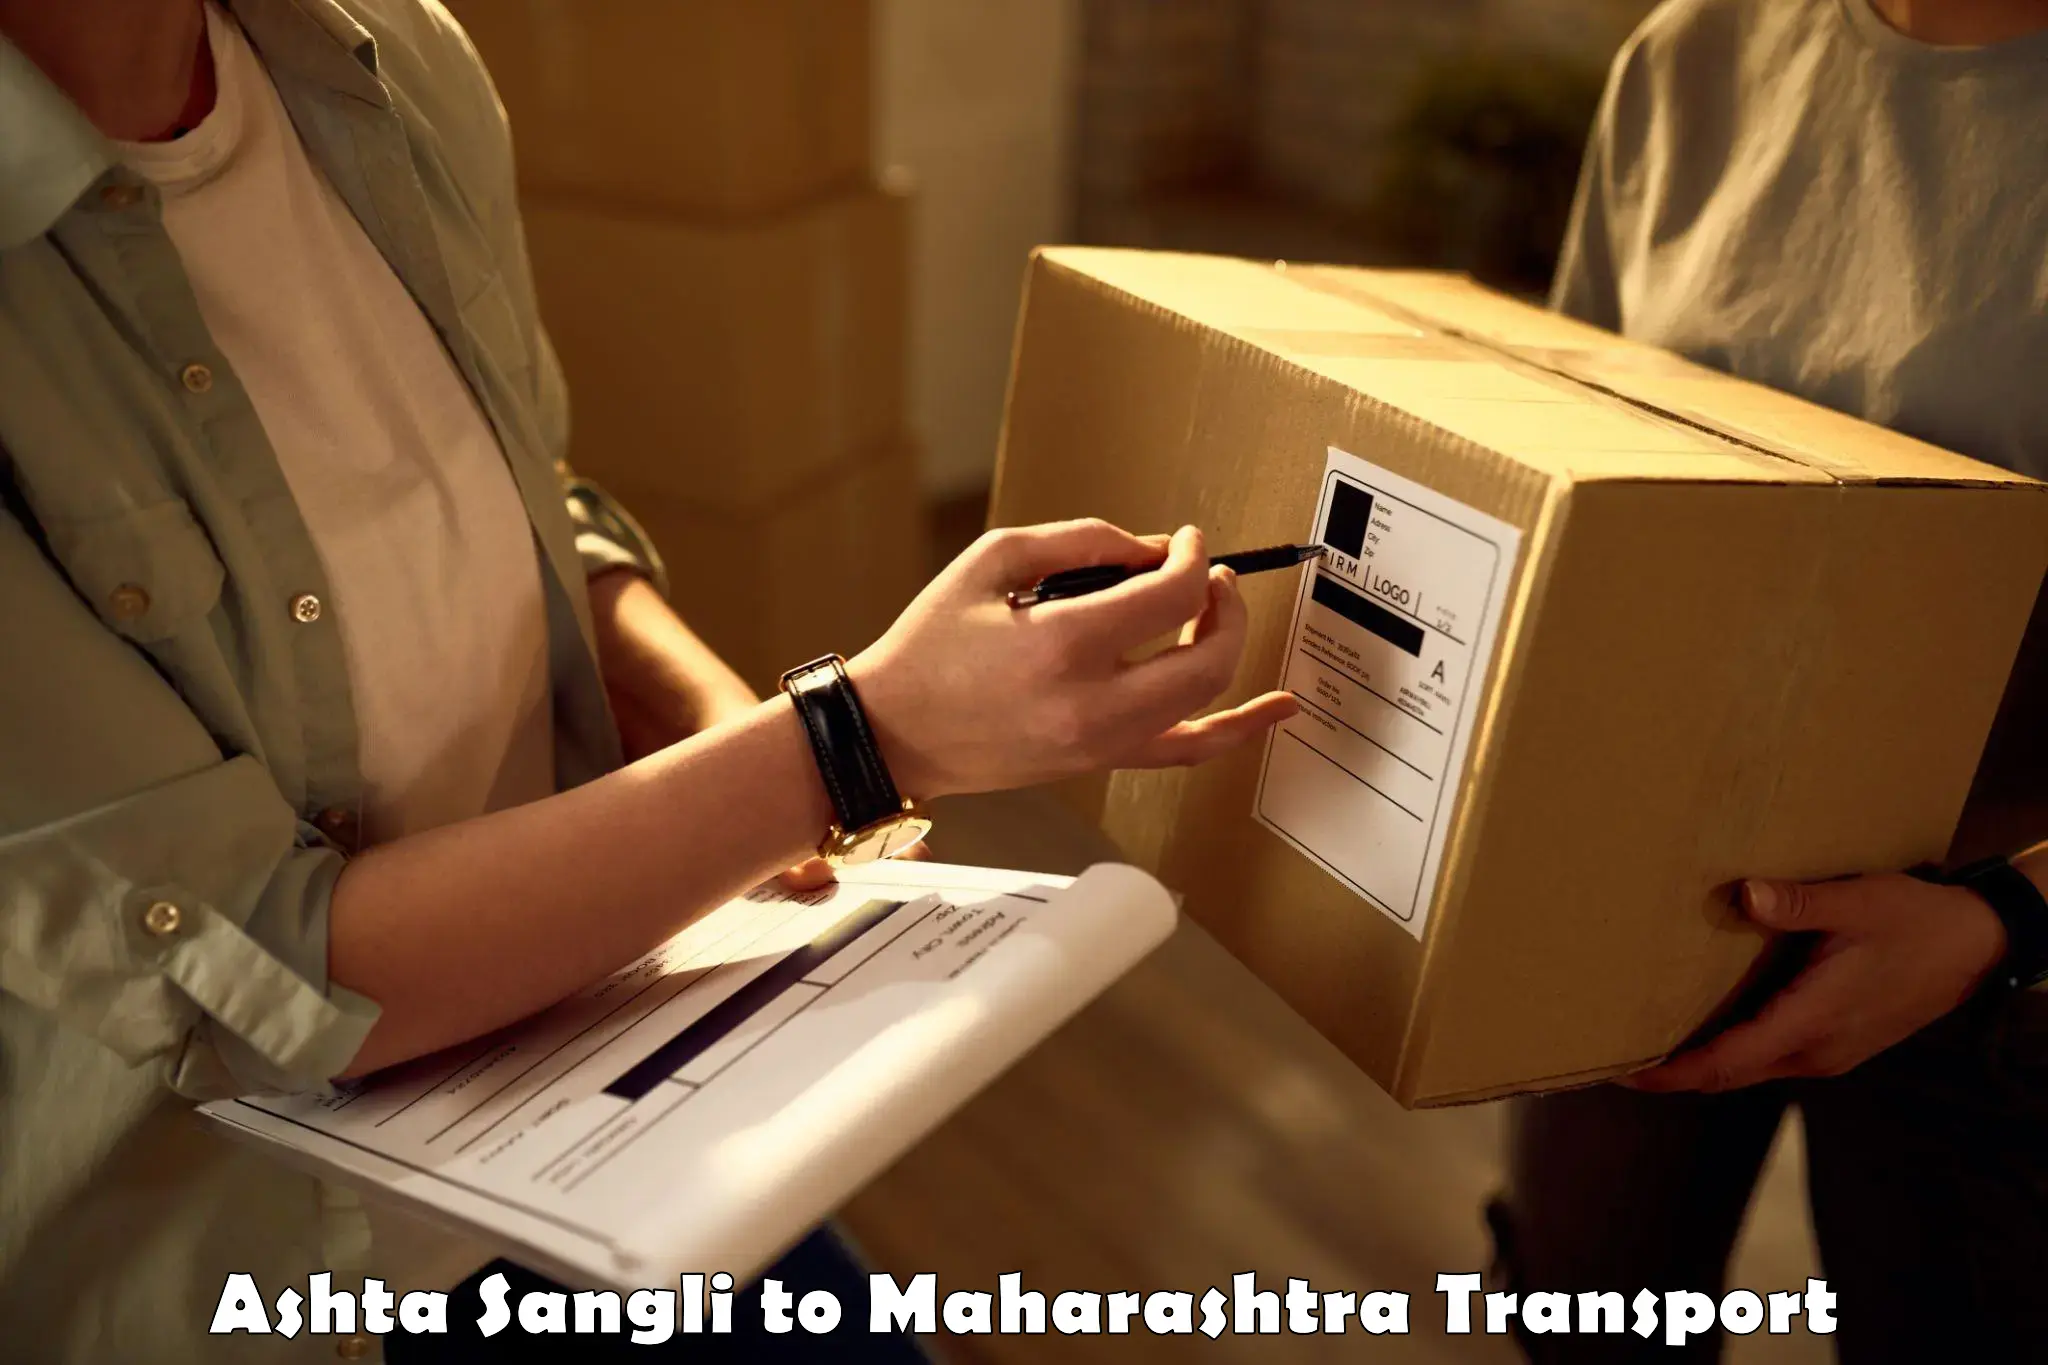 Daily parcel service transport in Ashta Sangli to Thane